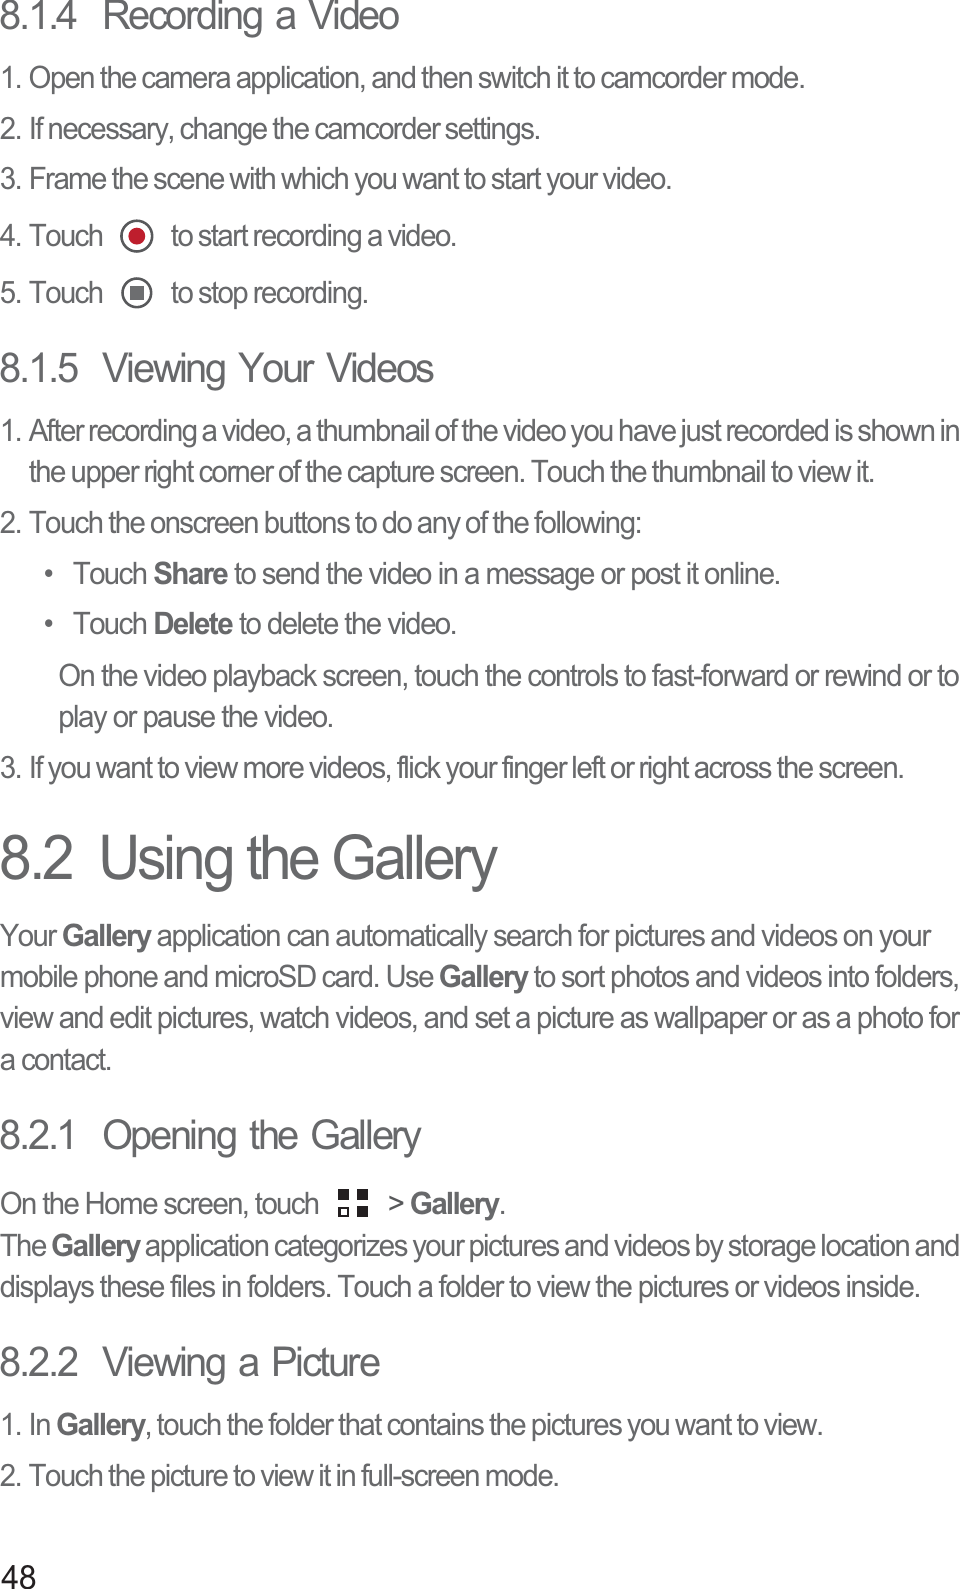 488.1.4  Recording a Video1. Open the camera application, and then switch it to camcorder mode.2. If necessary, change the camcorder settings.3. Frame the scene with which you want to start your video.4. Touch   to start recording a video.5. Touch   to stop recording.8.1.5  Viewing Your Videos1. After recording a video, a thumbnail of the video you have just recorded is shown in the upper right corner of the capture screen. Touch the thumbnail to view it.2. Touch the onscreen buttons to do any of the following:• Touch Share to send the video in a message or post it online.• Touch Delete to delete the video.On the video playback screen, touch the controls to fast-forward or rewind or to play or pause the video.3. If you want to view more videos, flick your finger left or right across the screen.8.2  Using the GalleryYour Gallery application can automatically search for pictures and videos on your mobile phone and microSD card. Use Gallery to sort photos and videos into folders, view and edit pictures, watch videos, and set a picture as wallpaper or as a photo for a contact.8.2.1  Opening the GalleryOn the Home screen, touch   &gt; Gallery.TheGallery application categorizes your pictures and videos by storage location and displays these files in folders. Touch a folder to view the pictures or videos inside.8.2.2  Viewing a Picture1. In Gallery, touch the folder that contains the pictures you want to view.2. Touch the picture to view it in full-screen mode.